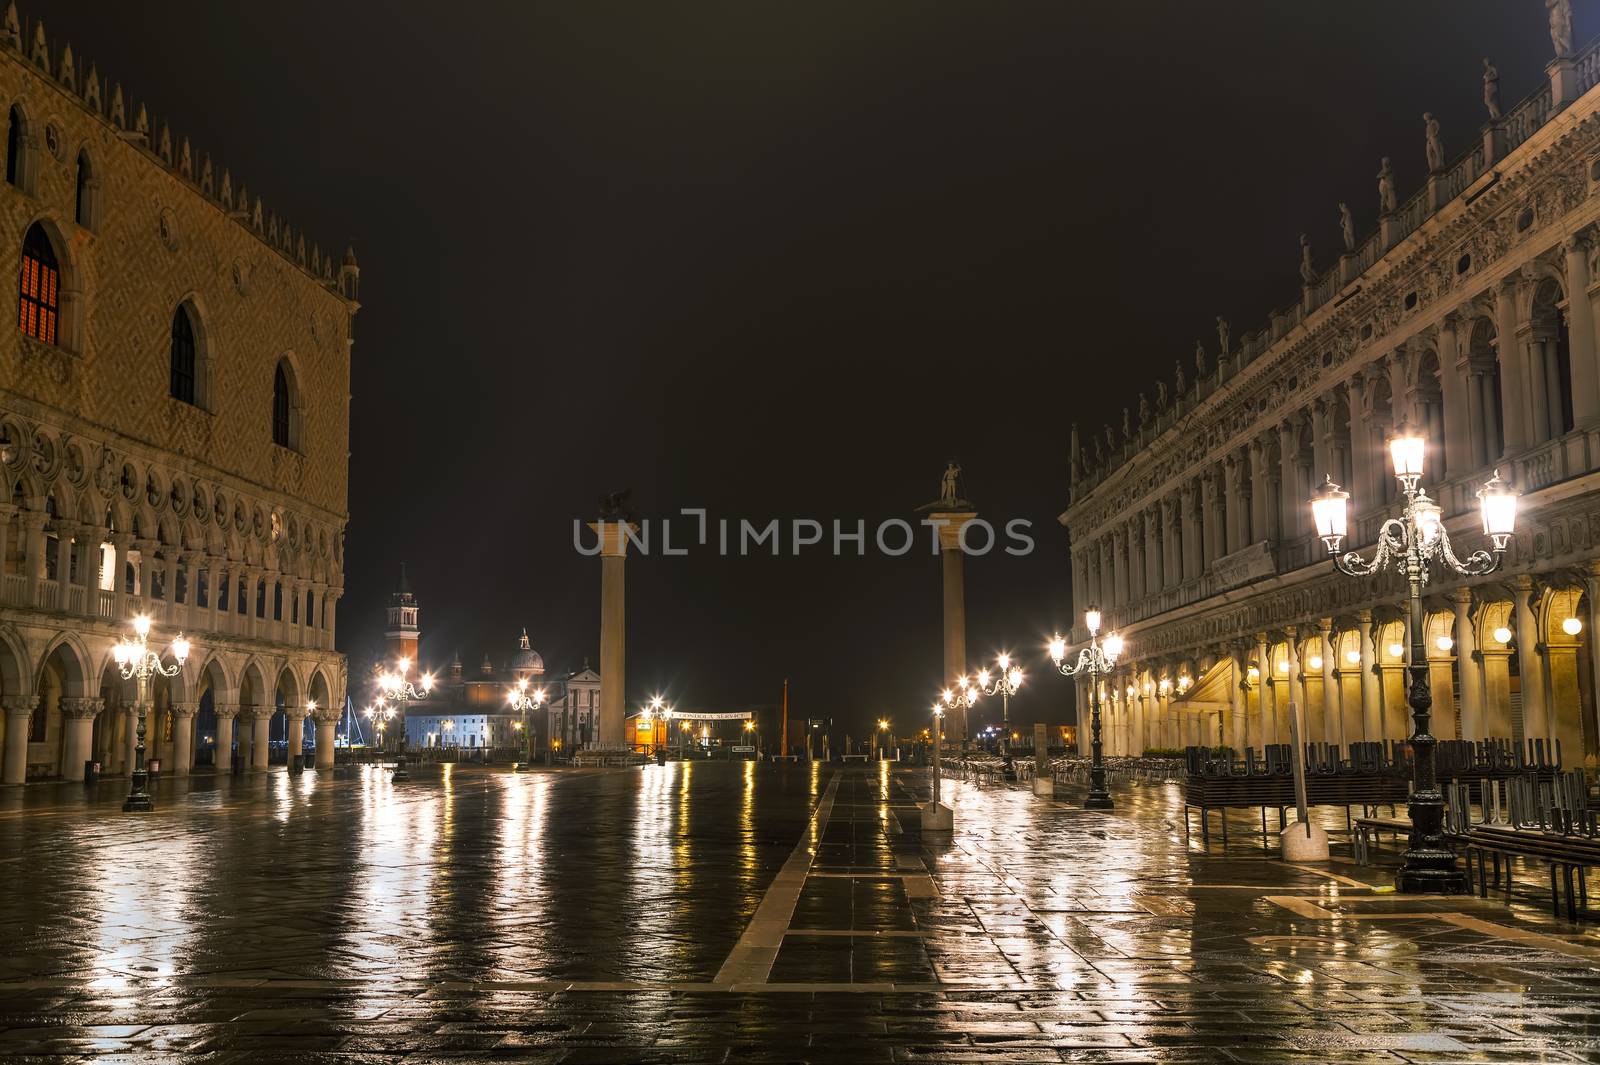 San Marco square in Venice, Italy at the night time